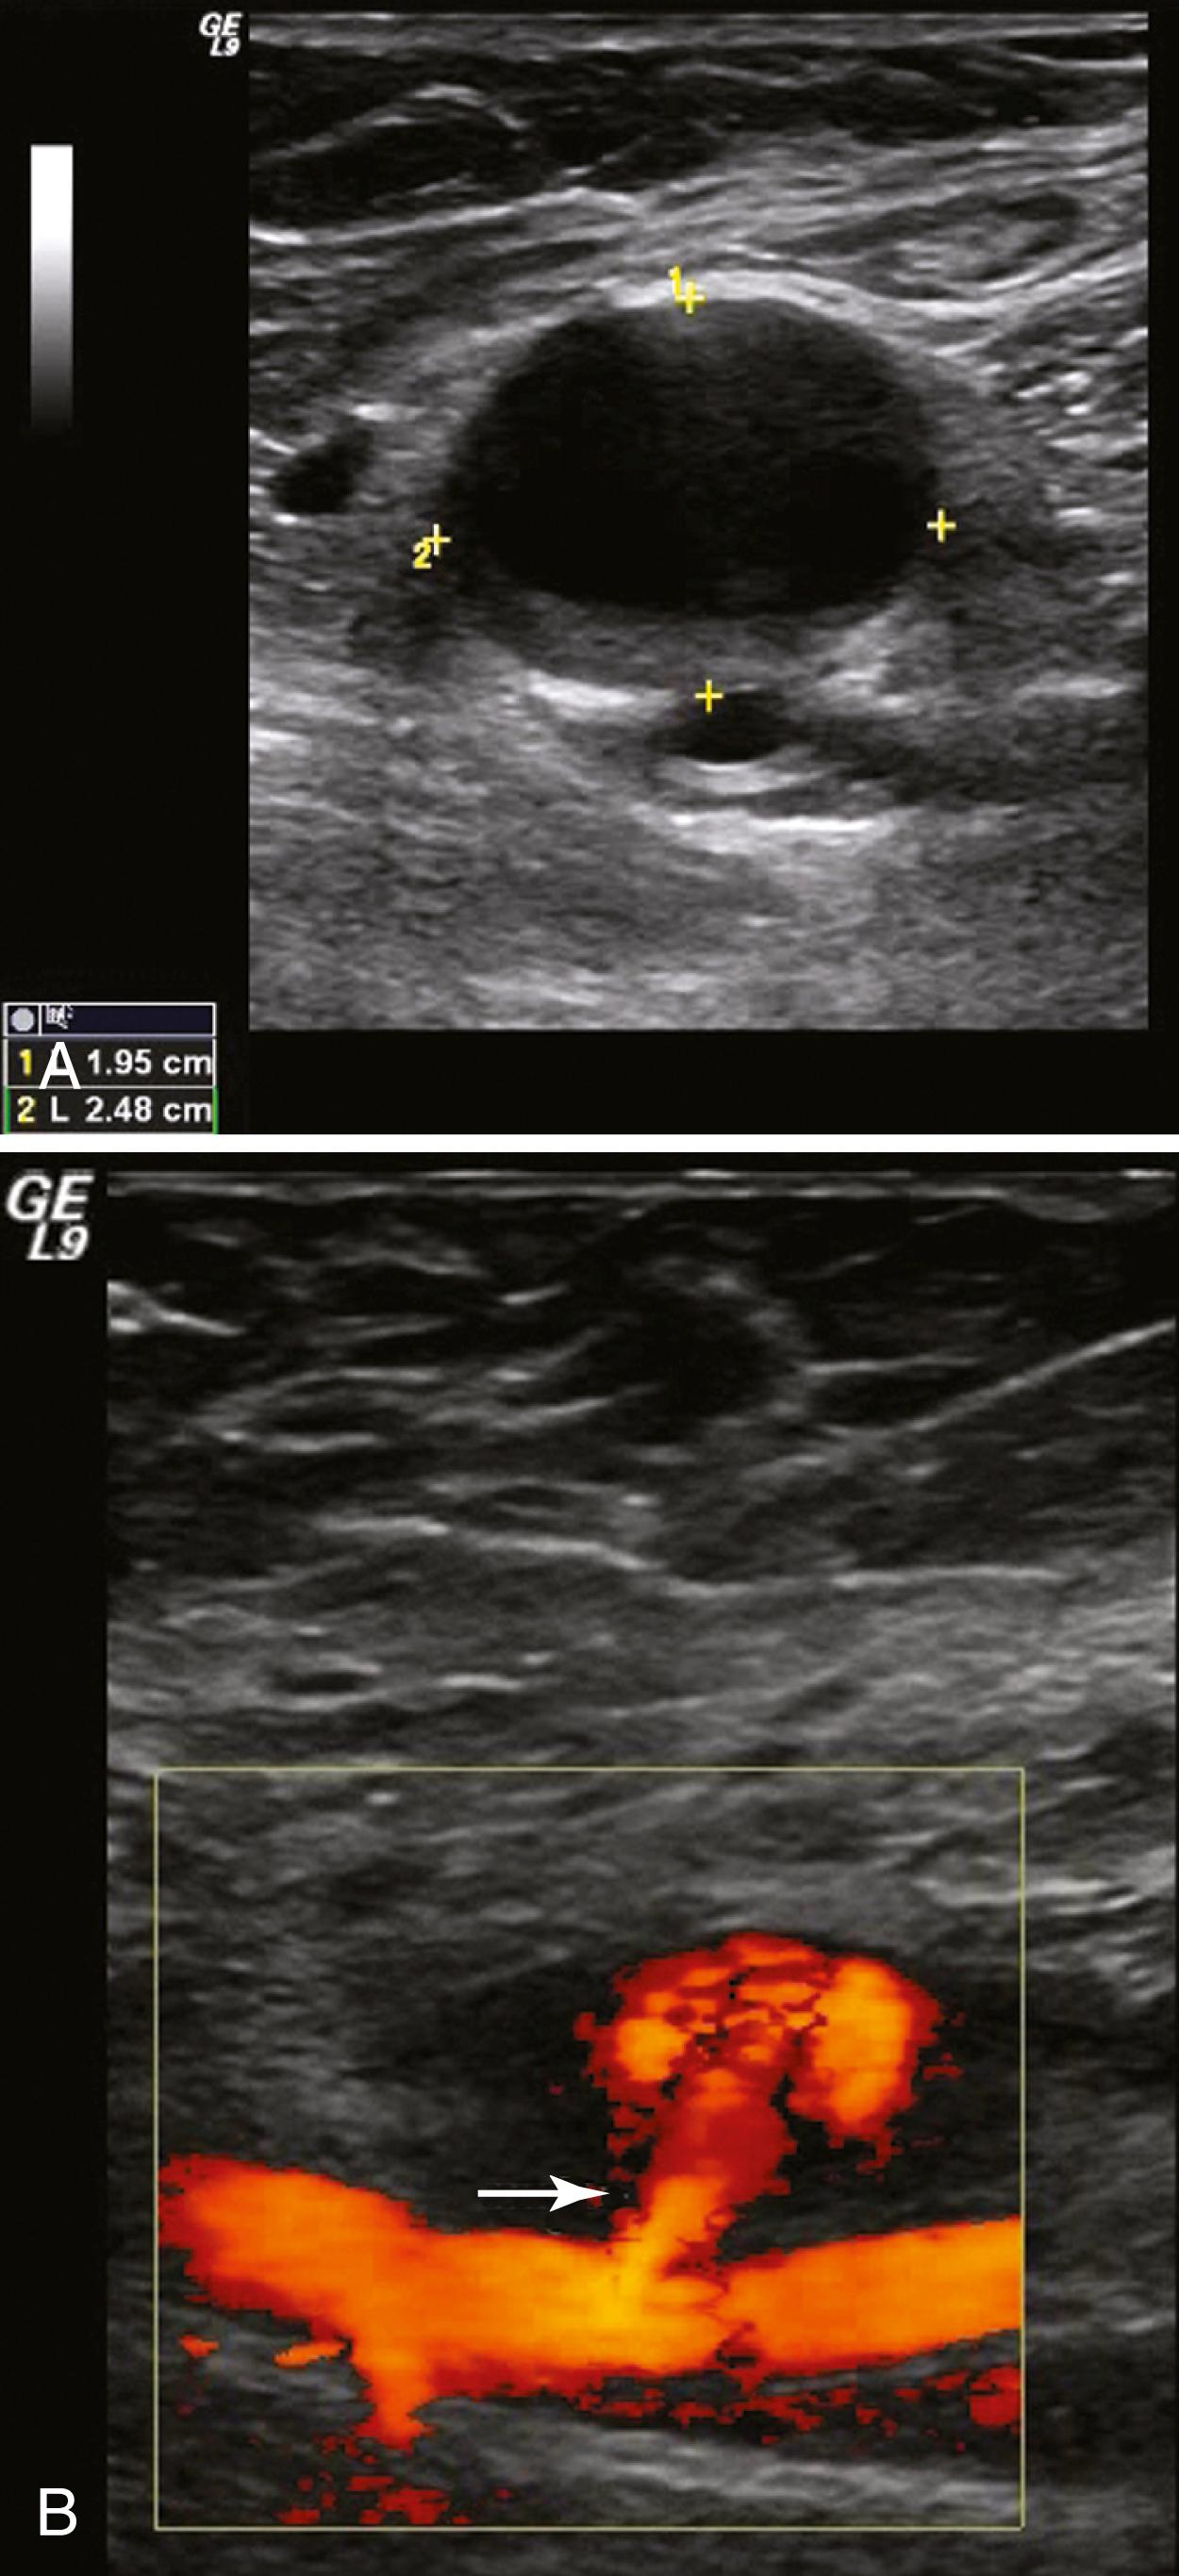 Figure 85.3, ( A ) Duplex ultrasound of a femoral false aneurysm in B mode demonstrating a large echolucent mass anterior to the femoral artery. The cursor marks the dimensions of the aneurysm cavity. ( B ) Color-flow imaging demonstrating blood entering the aneurysm sac via a relatively long channel or “neck” (arrow) , arising from the femoral artery.